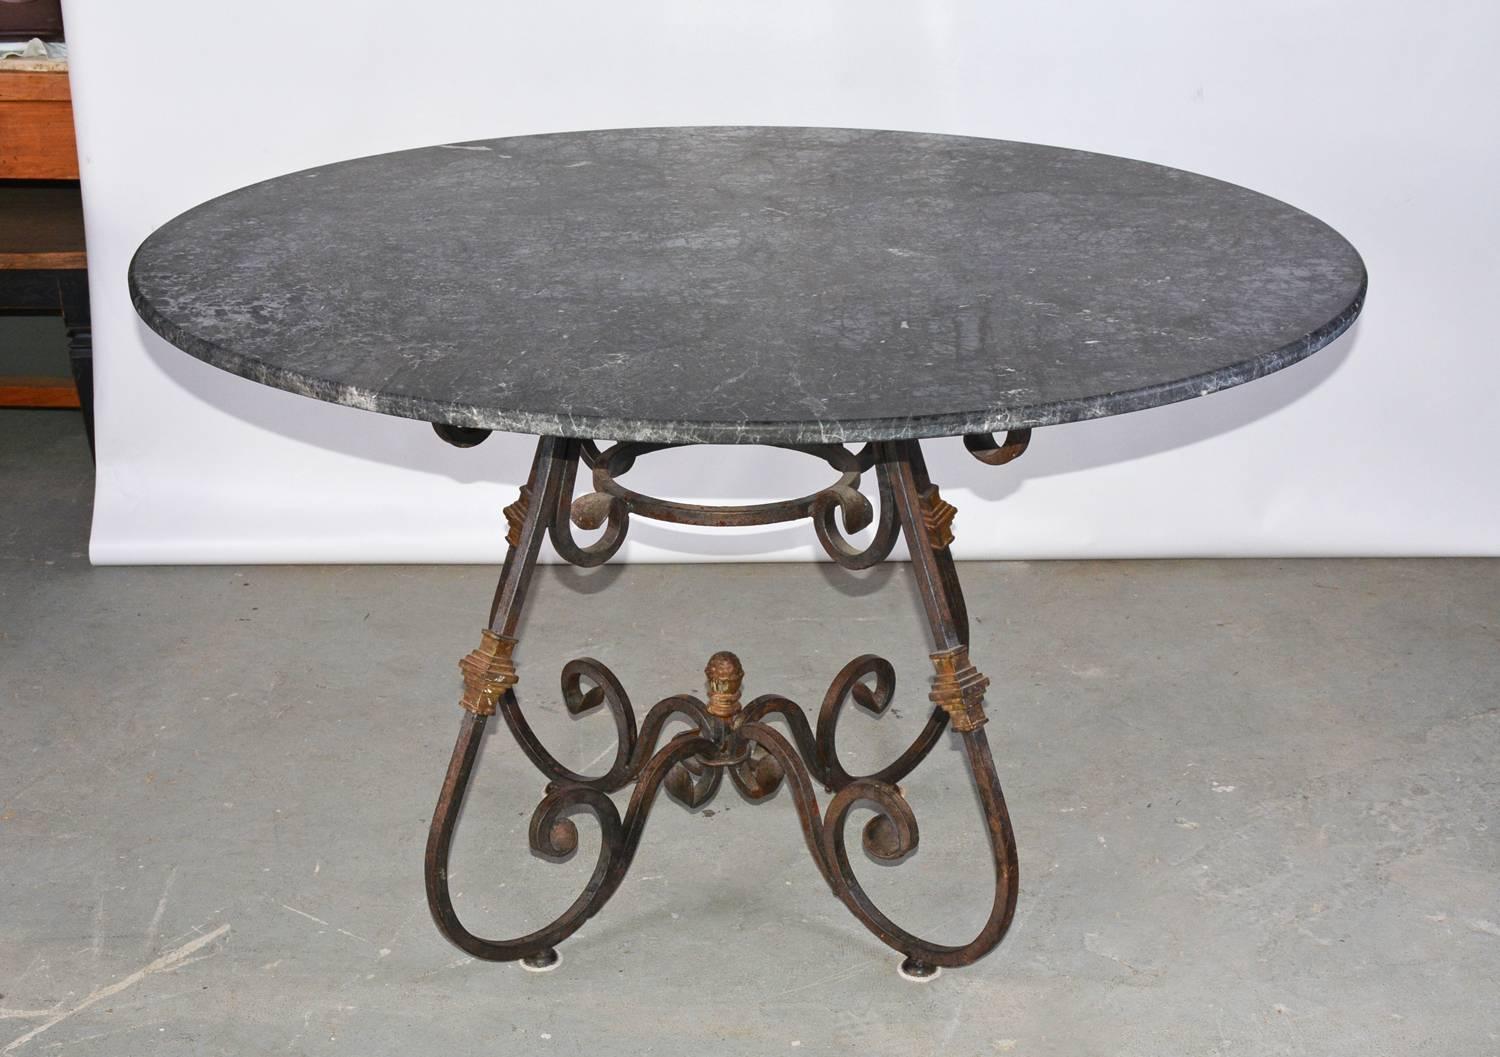 20th Century Continental Wrought Iron and Marble Dining Table